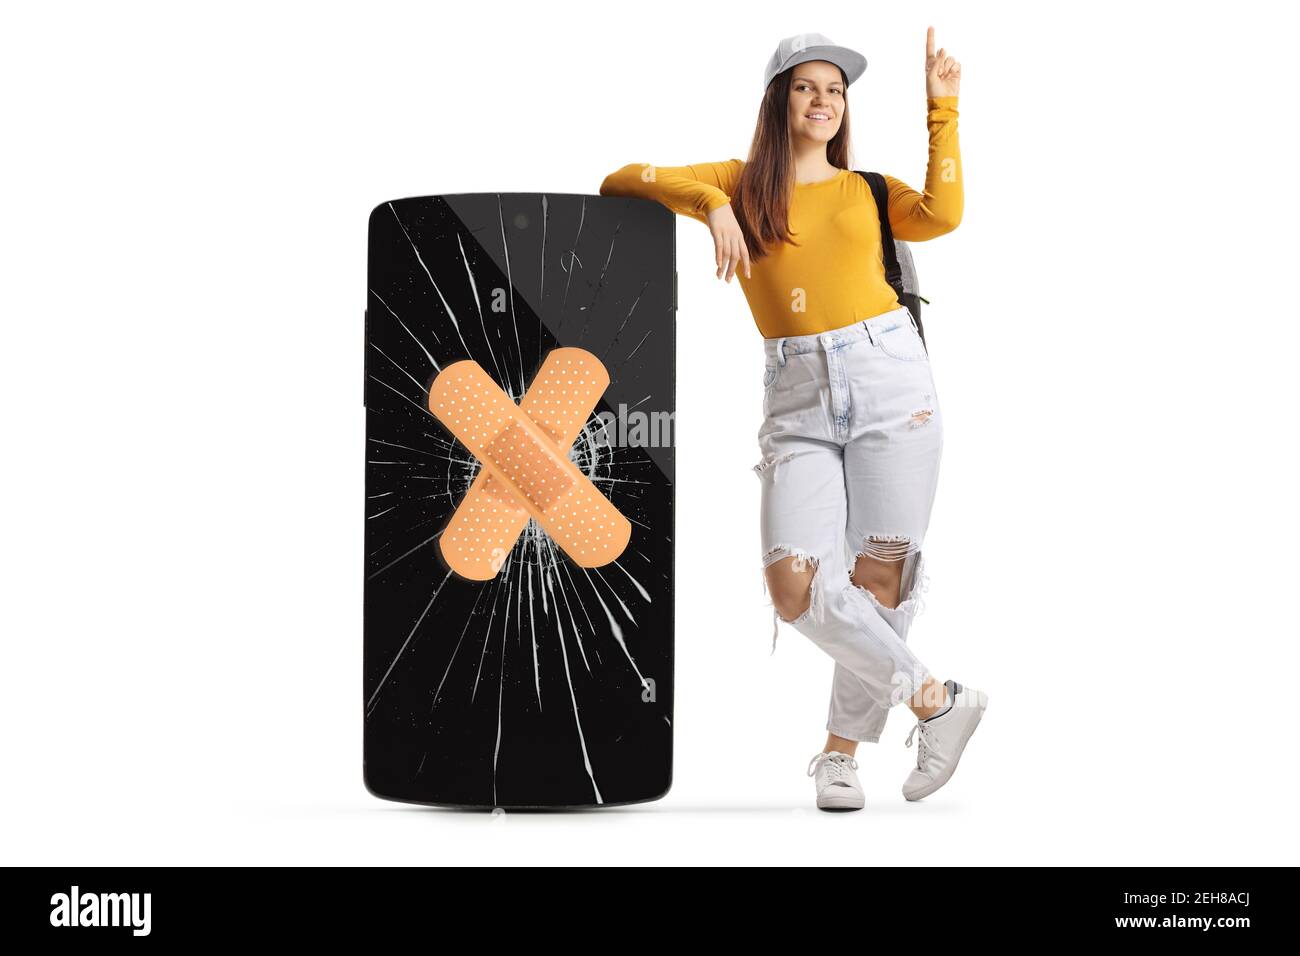 Full length portrait of a female student leaning on a big phone with a broken screen and band aid and pointing up isolated on white background Stock Photo